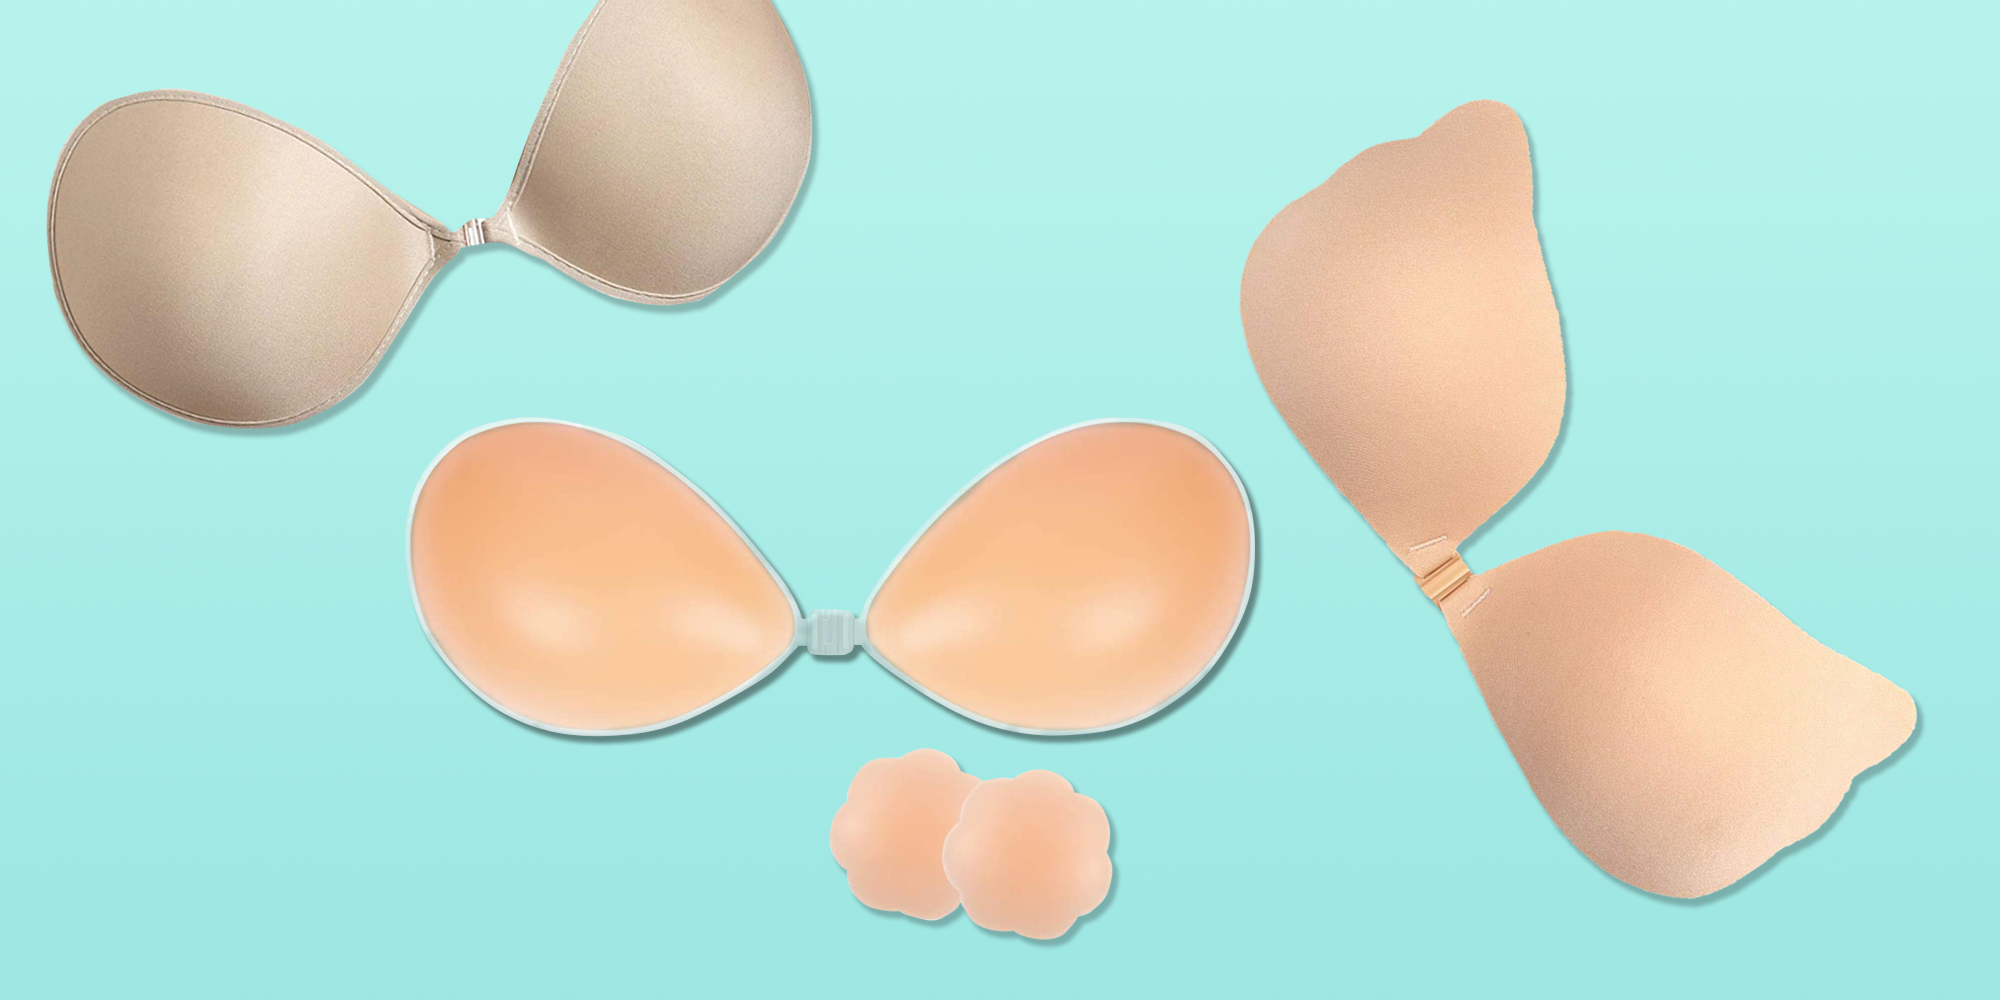 Details about   Silicone Invisible Push-Up Strapless Backless Self-Adhesive Magic Stick Bra /lkk 